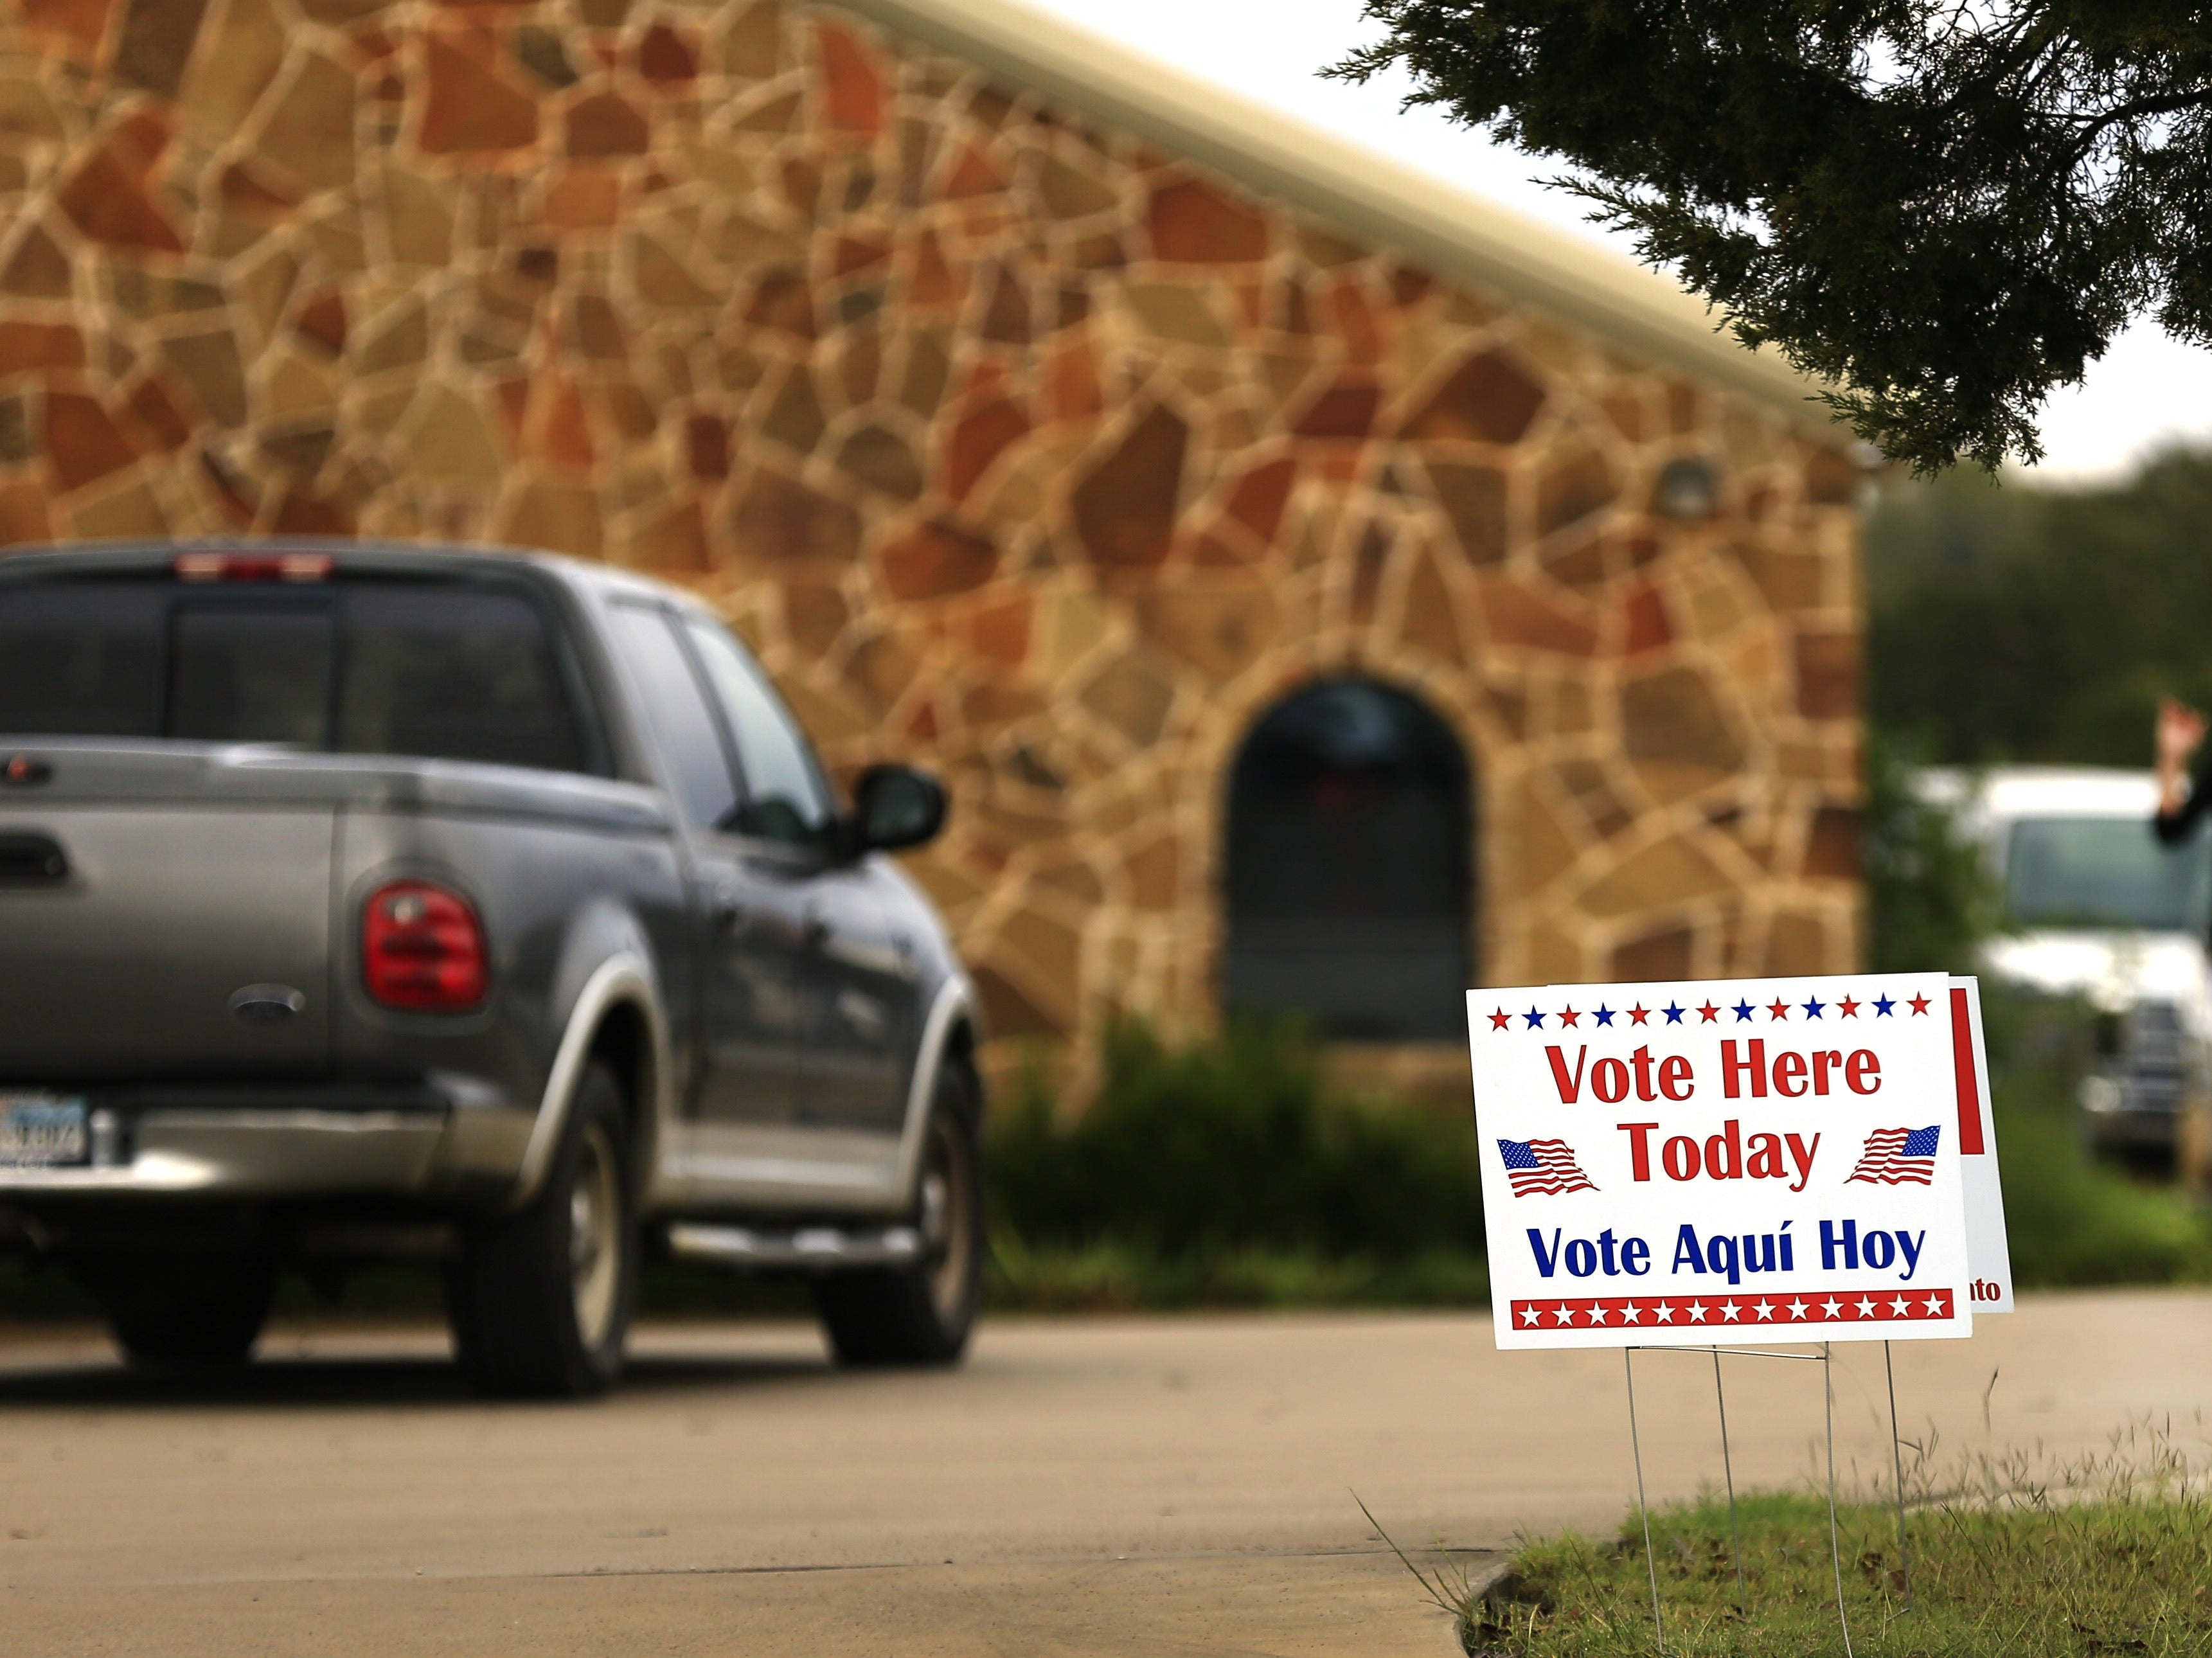 Voters arrive at a polling place to cast their ballots on 8 November, 2016 in Brock, Texas.